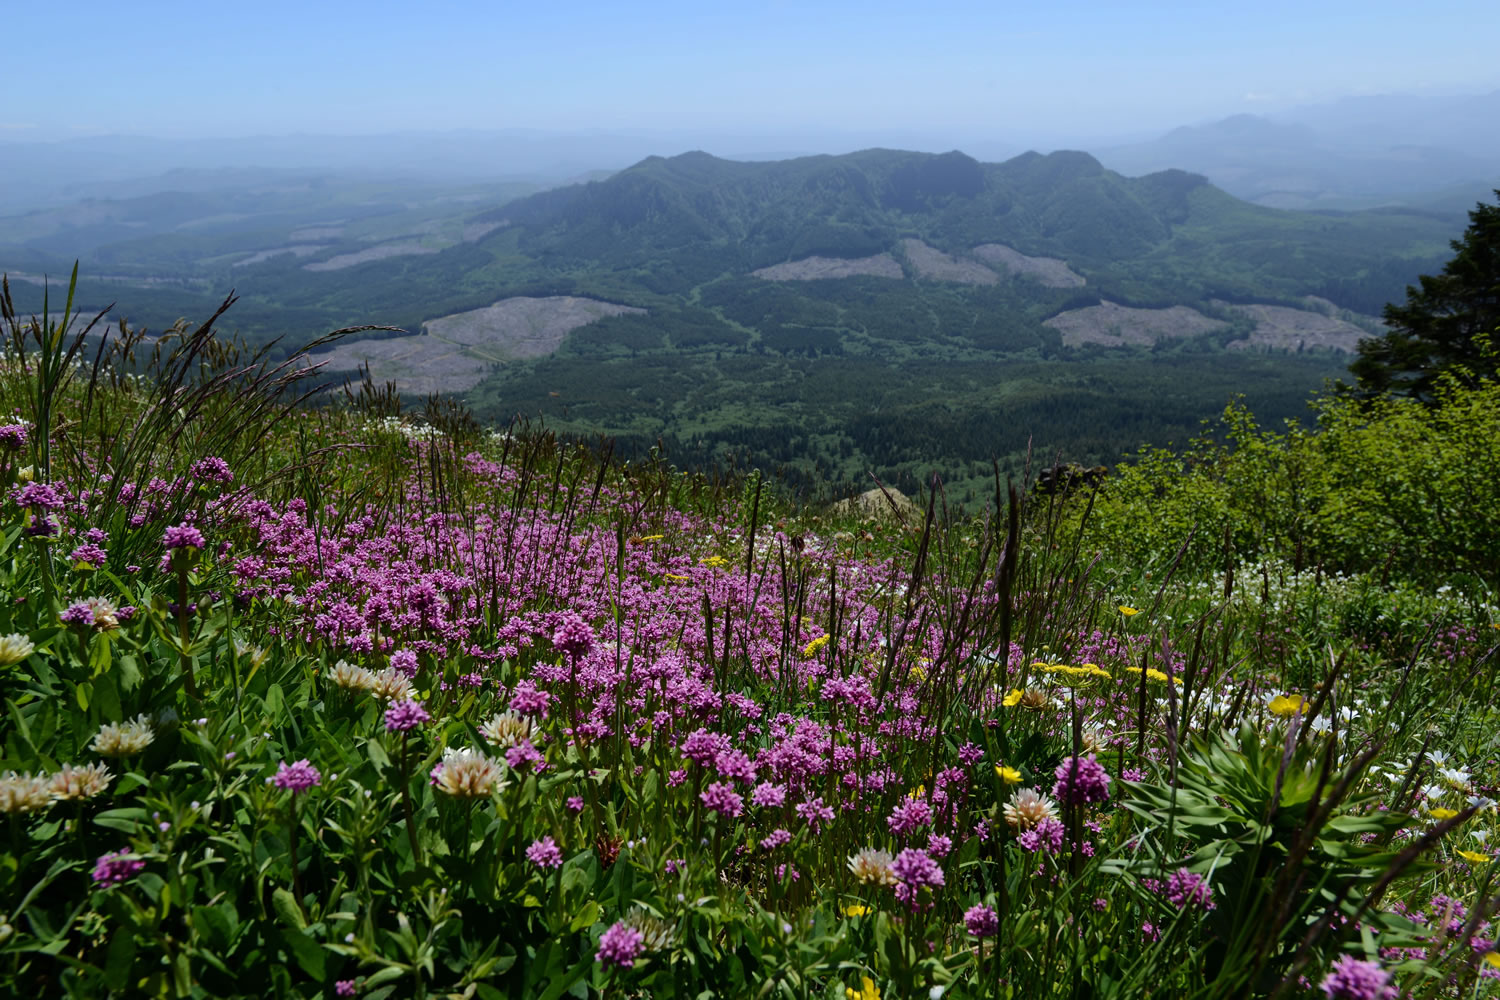 In this June 4, 2014 photo, wildflowers color the trail leading to the summit of Saddle Mountain in the Oregon Coast Range. The 2.5-mile trail to the summit rises 1,600 feet in elevation.